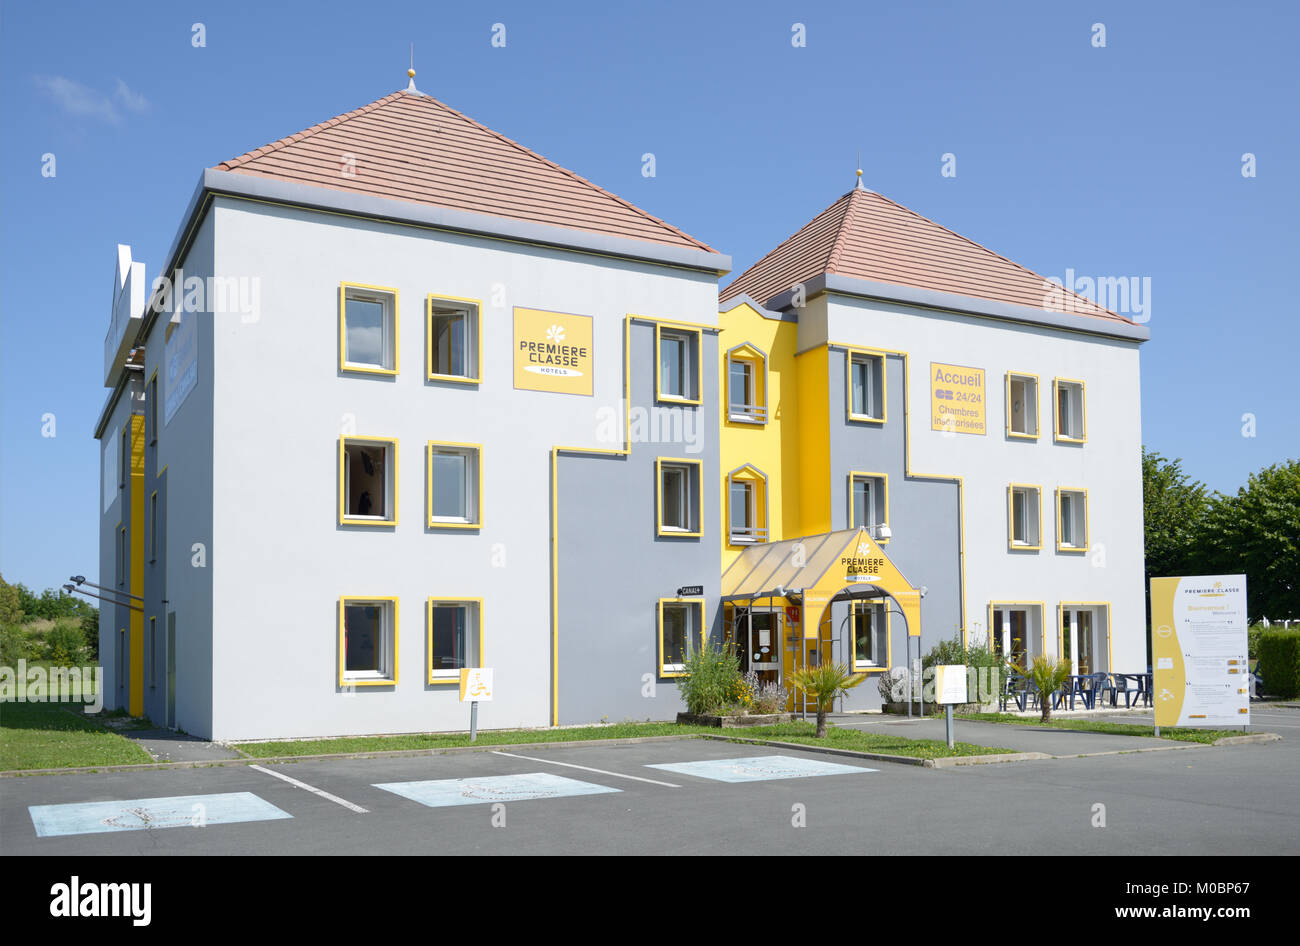 Aytre, Poitou-Charents, France - June 25, 2013: Building of the Premiere Classe hotel. It is an international chain of super low budget hotels having  Stock Photo